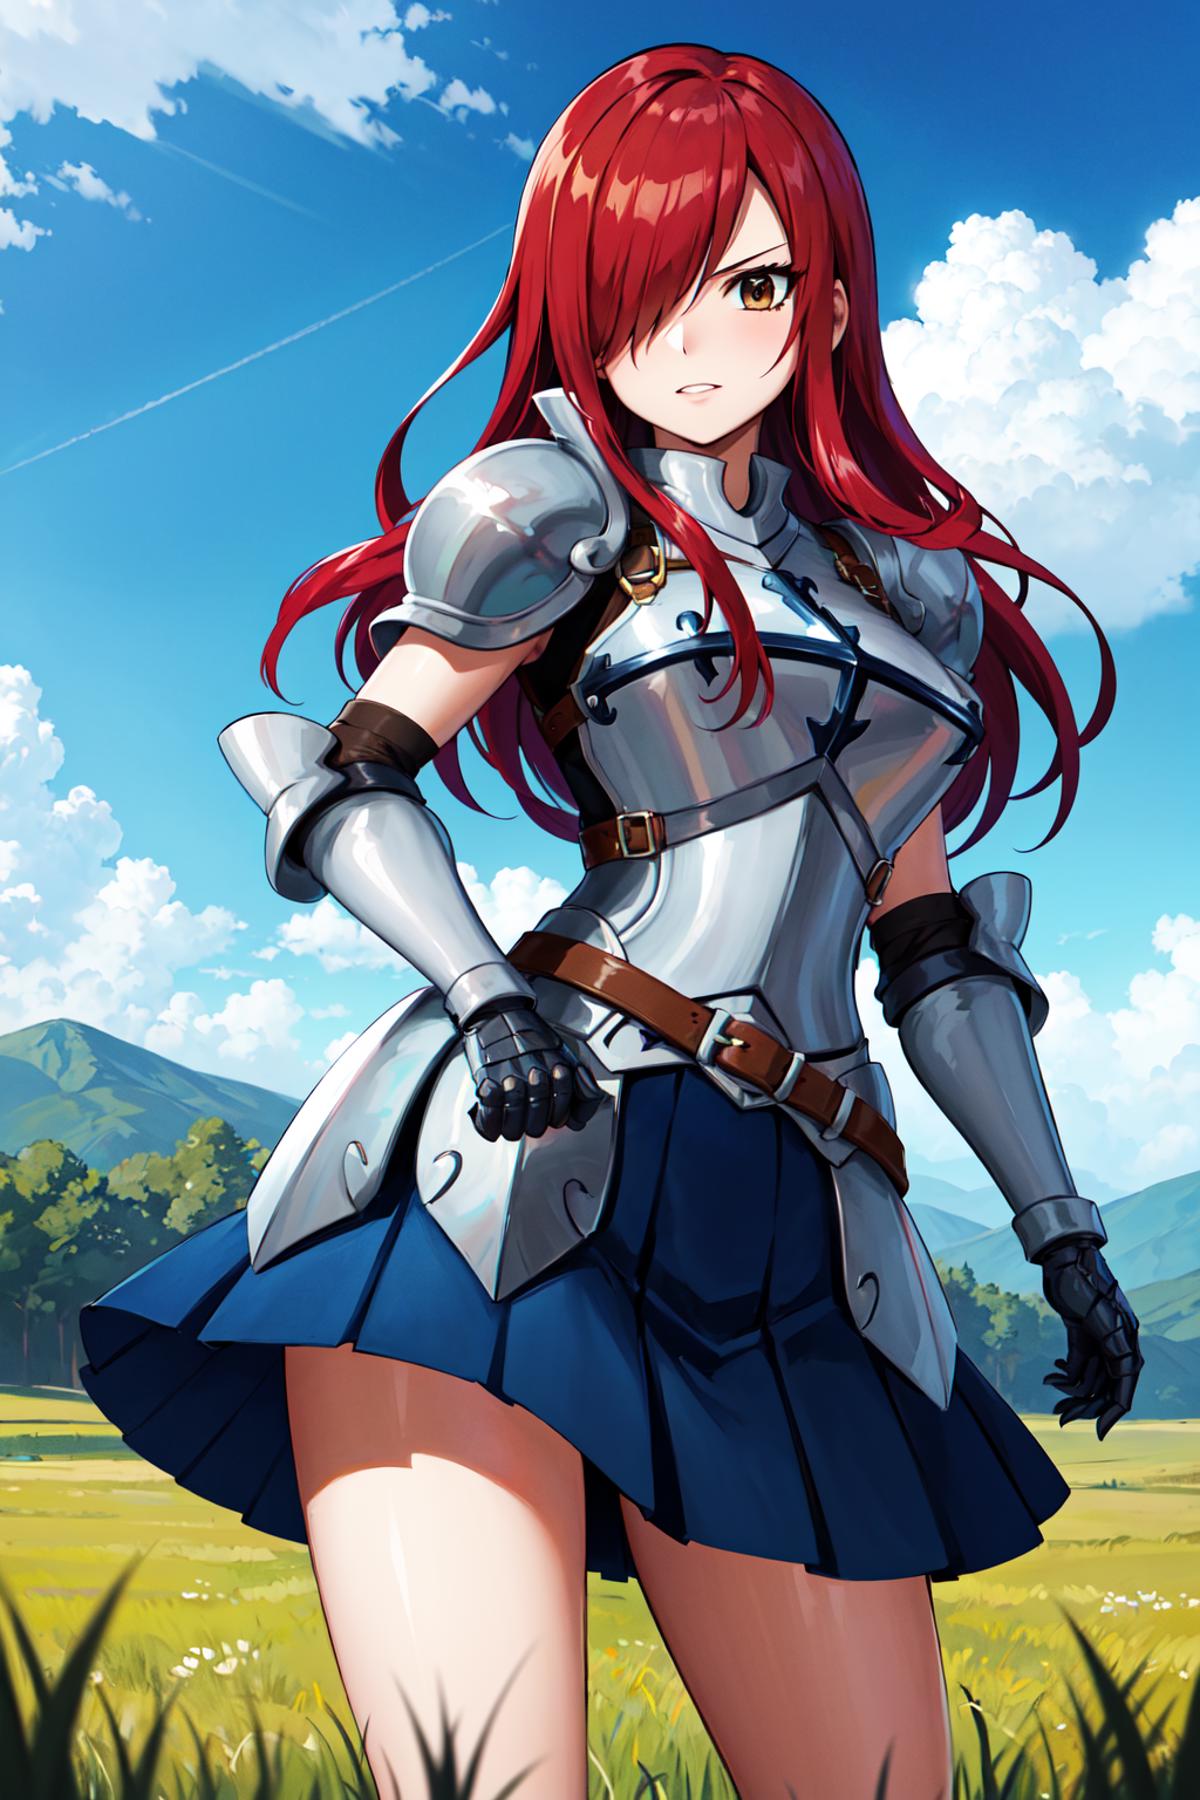 A cartoon female character wearing a knight's outfit with a sword, standing in a field.